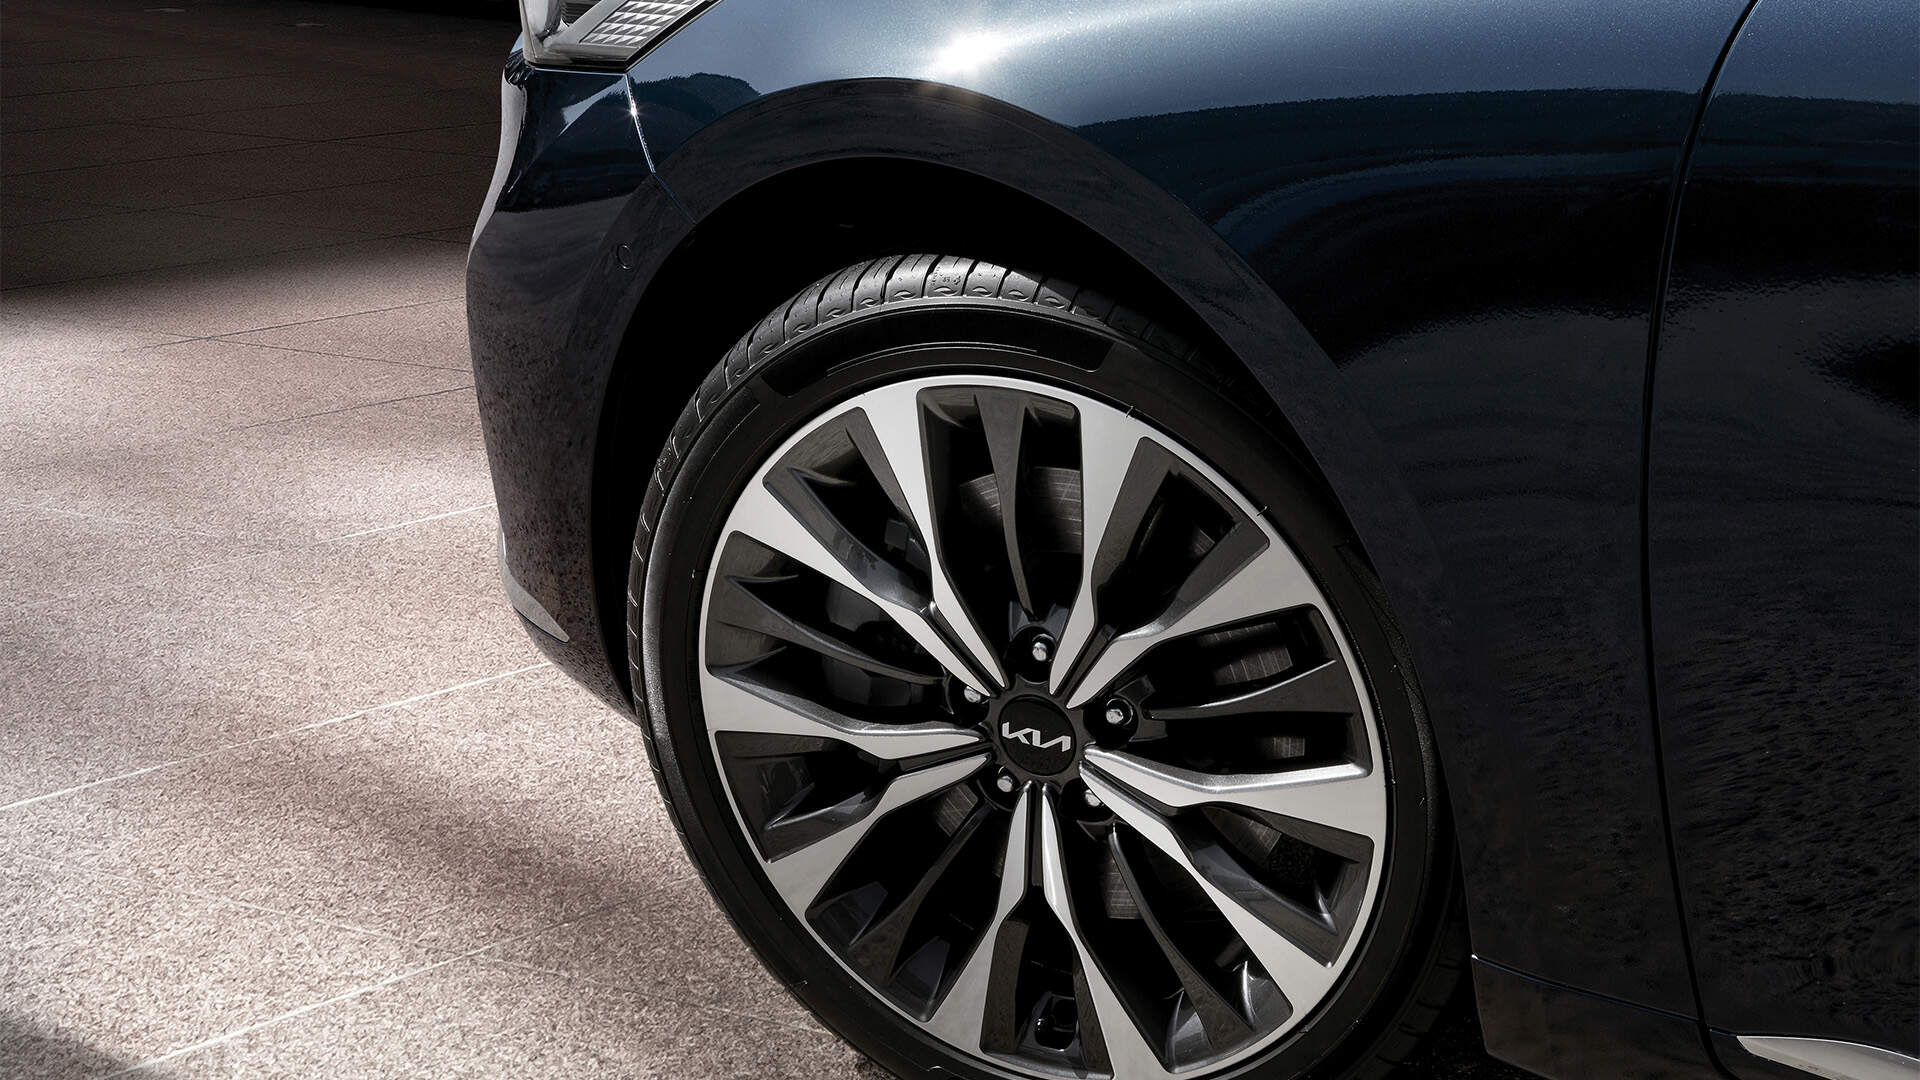 Close-up of a front left tyre of the Kia vehicle